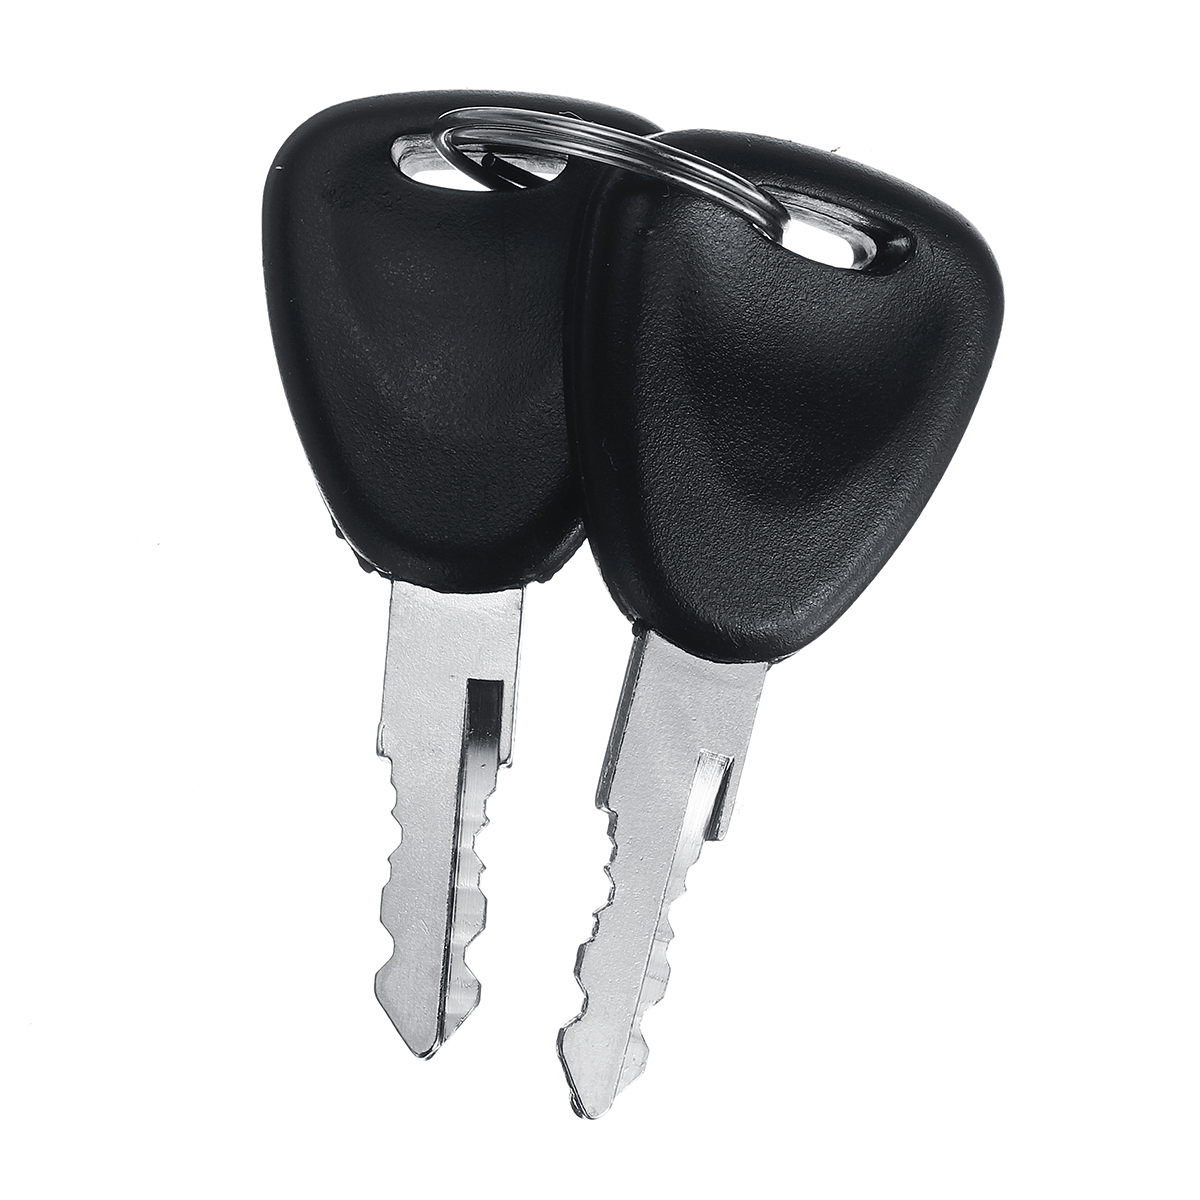 Find Door Lock Set Barrel For Renault Master Mascot Opel Movano Nissan Intersta 98 09 for Sale on Gipsybee.com with cryptocurrencies